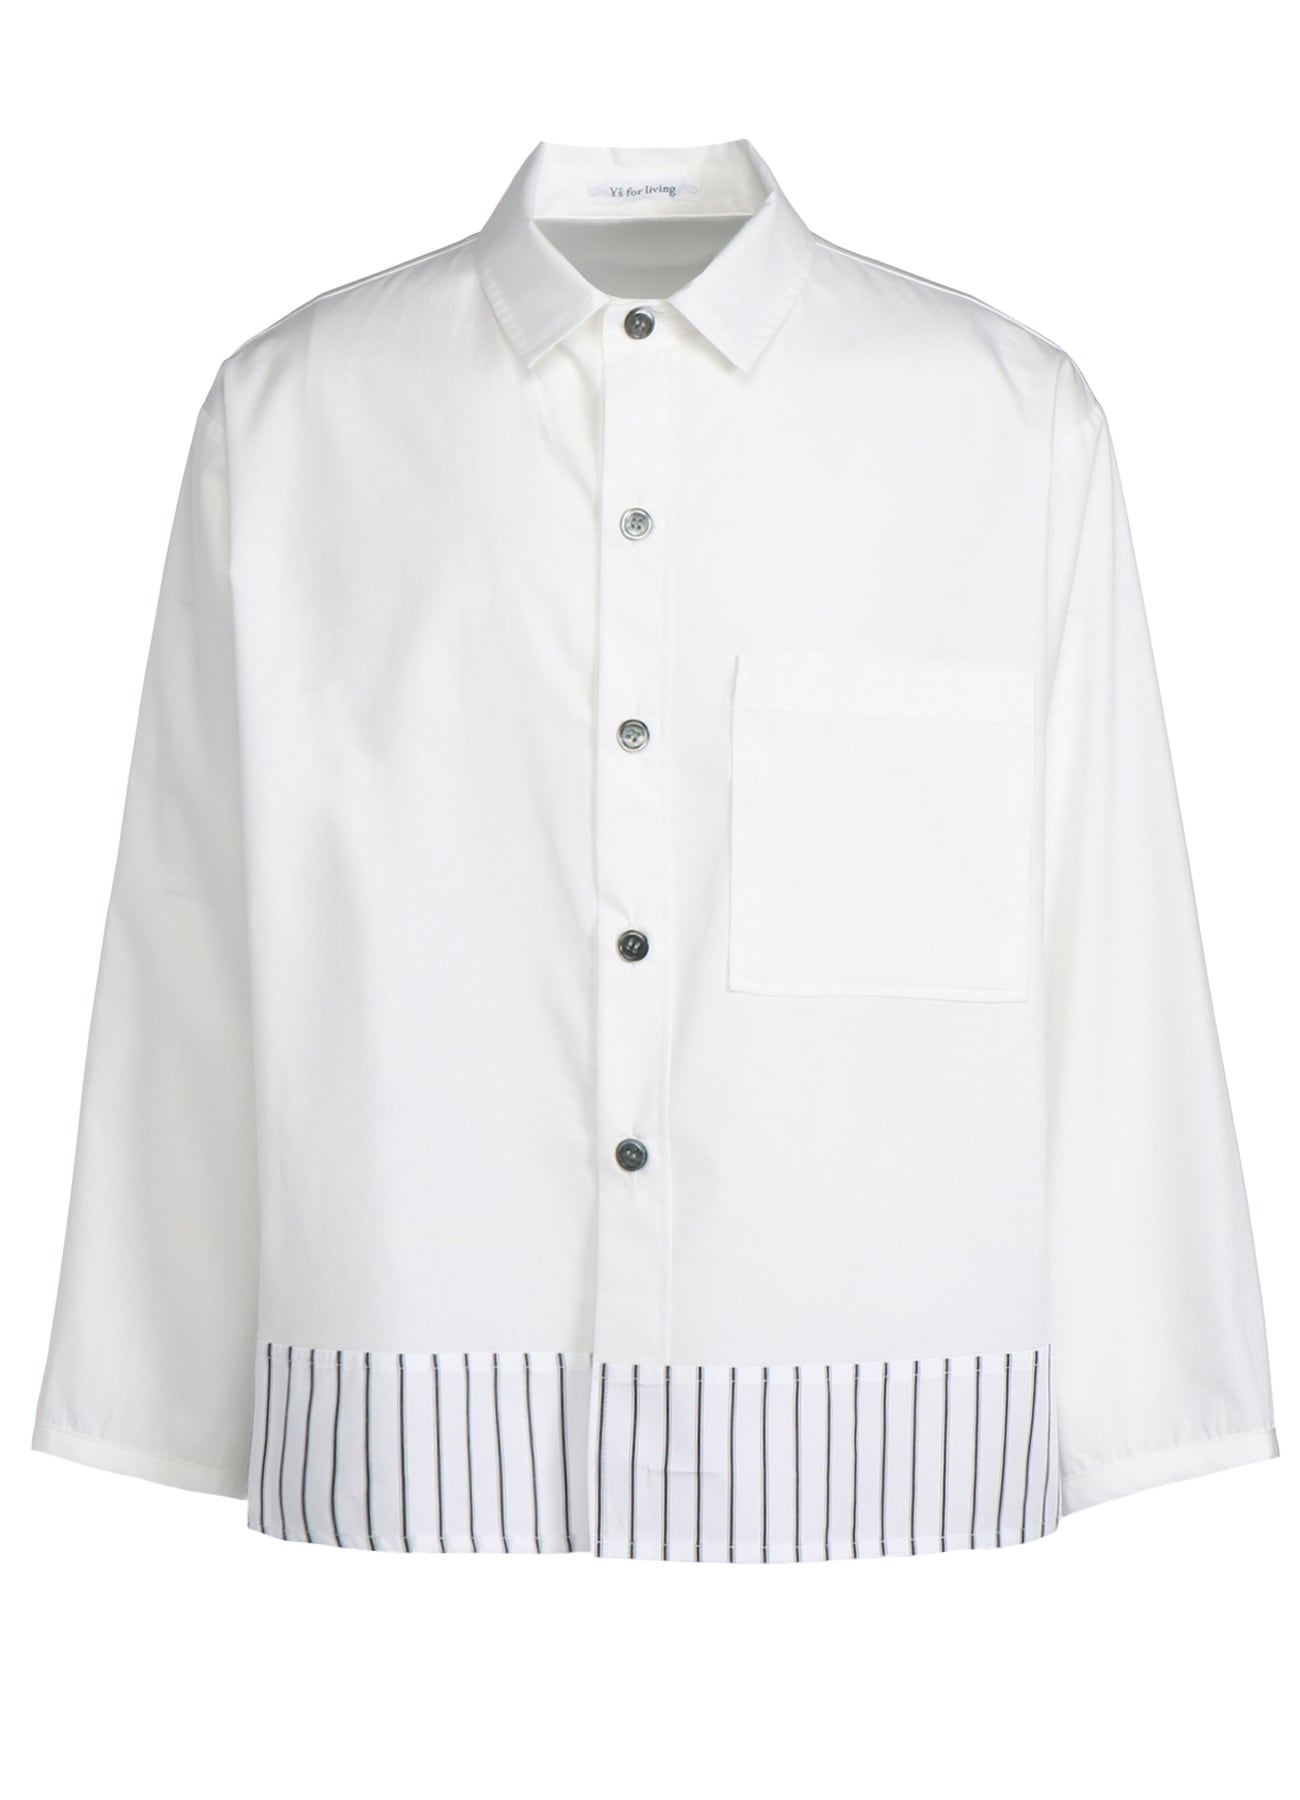 COTTON BROAD SHIRT (M)(M White x Stripe): Y's for living｜THE SHOP 